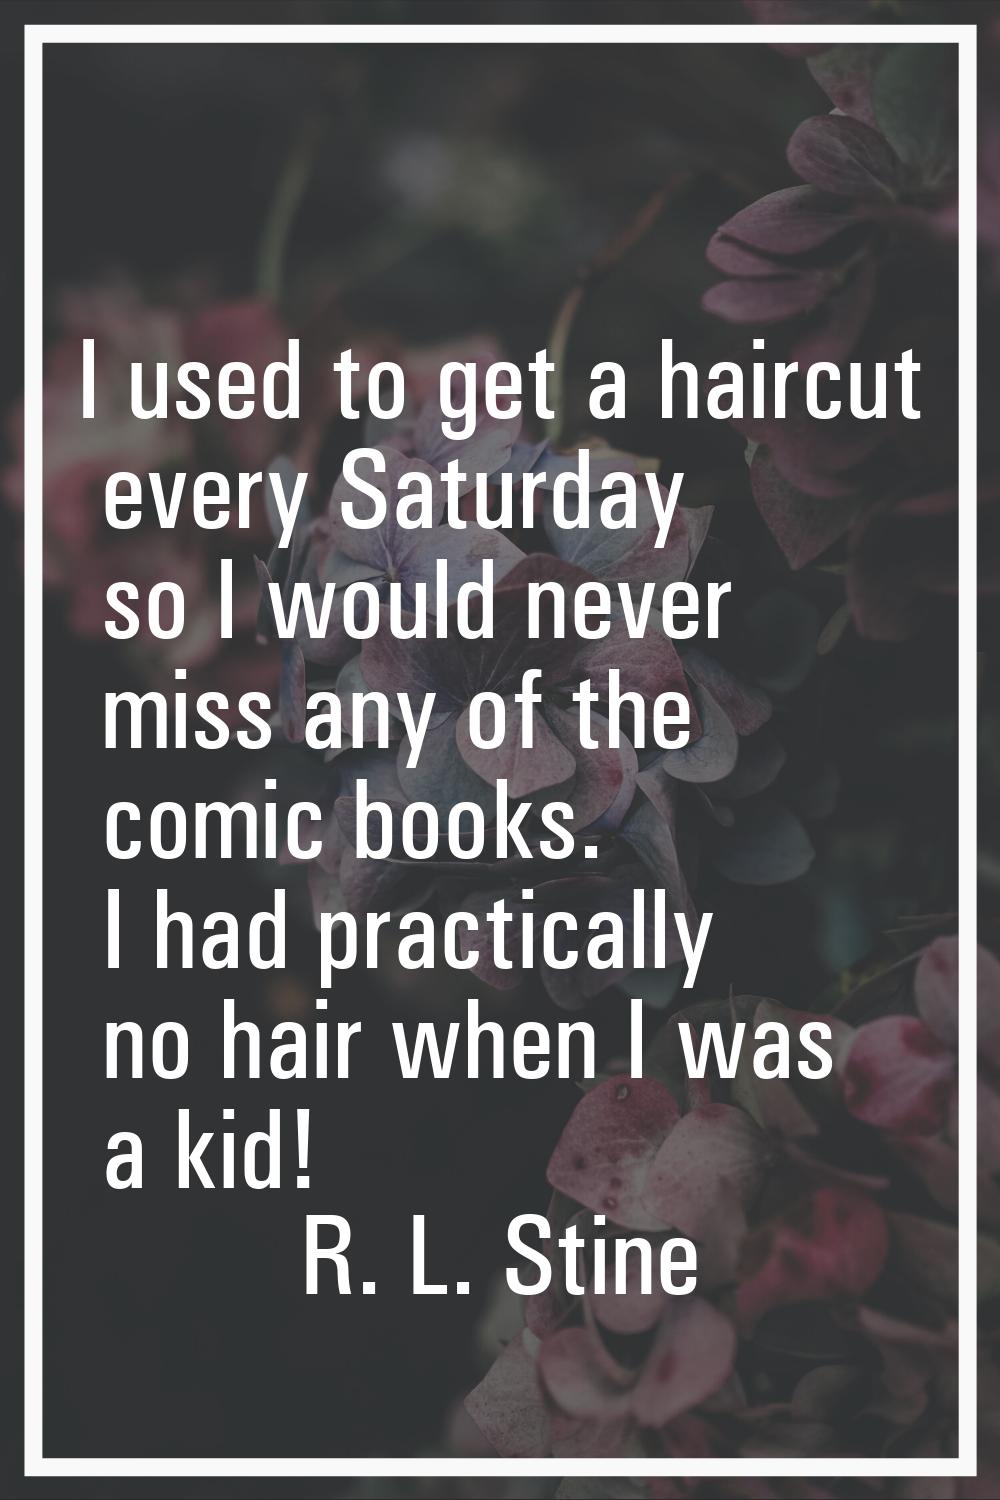 I used to get a haircut every Saturday so I would never miss any of the comic books. I had practica